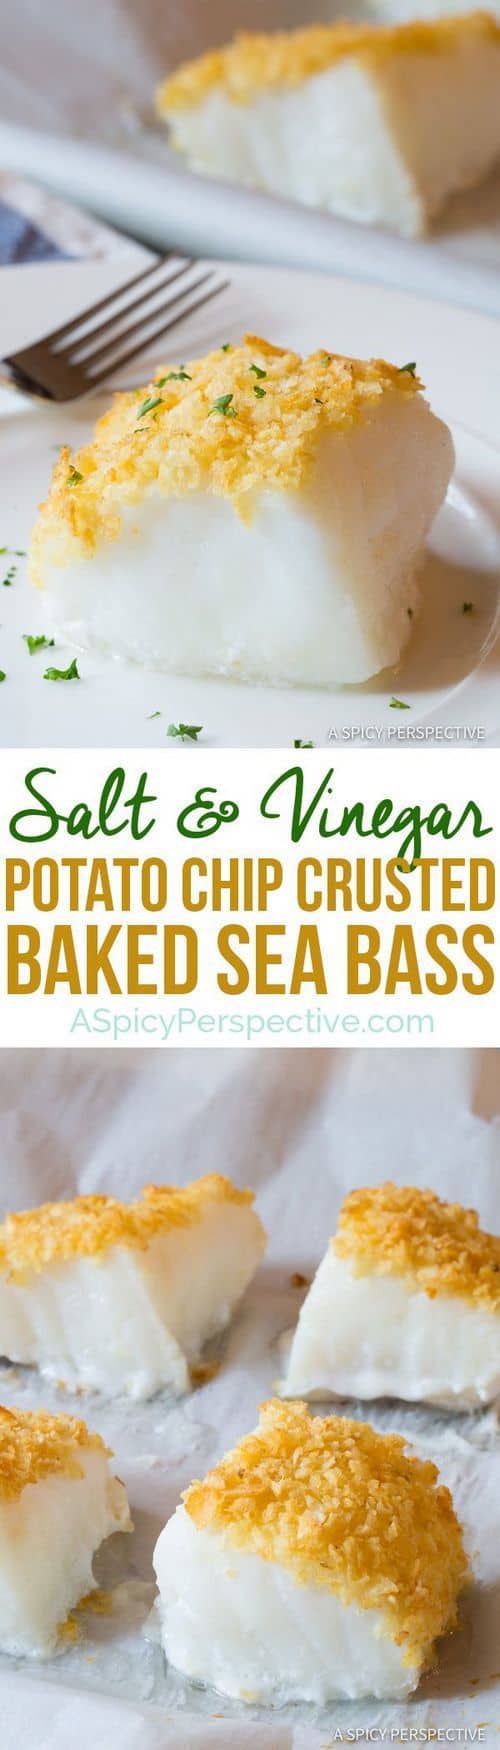 potato-chip-crusted-baked-sea-bass